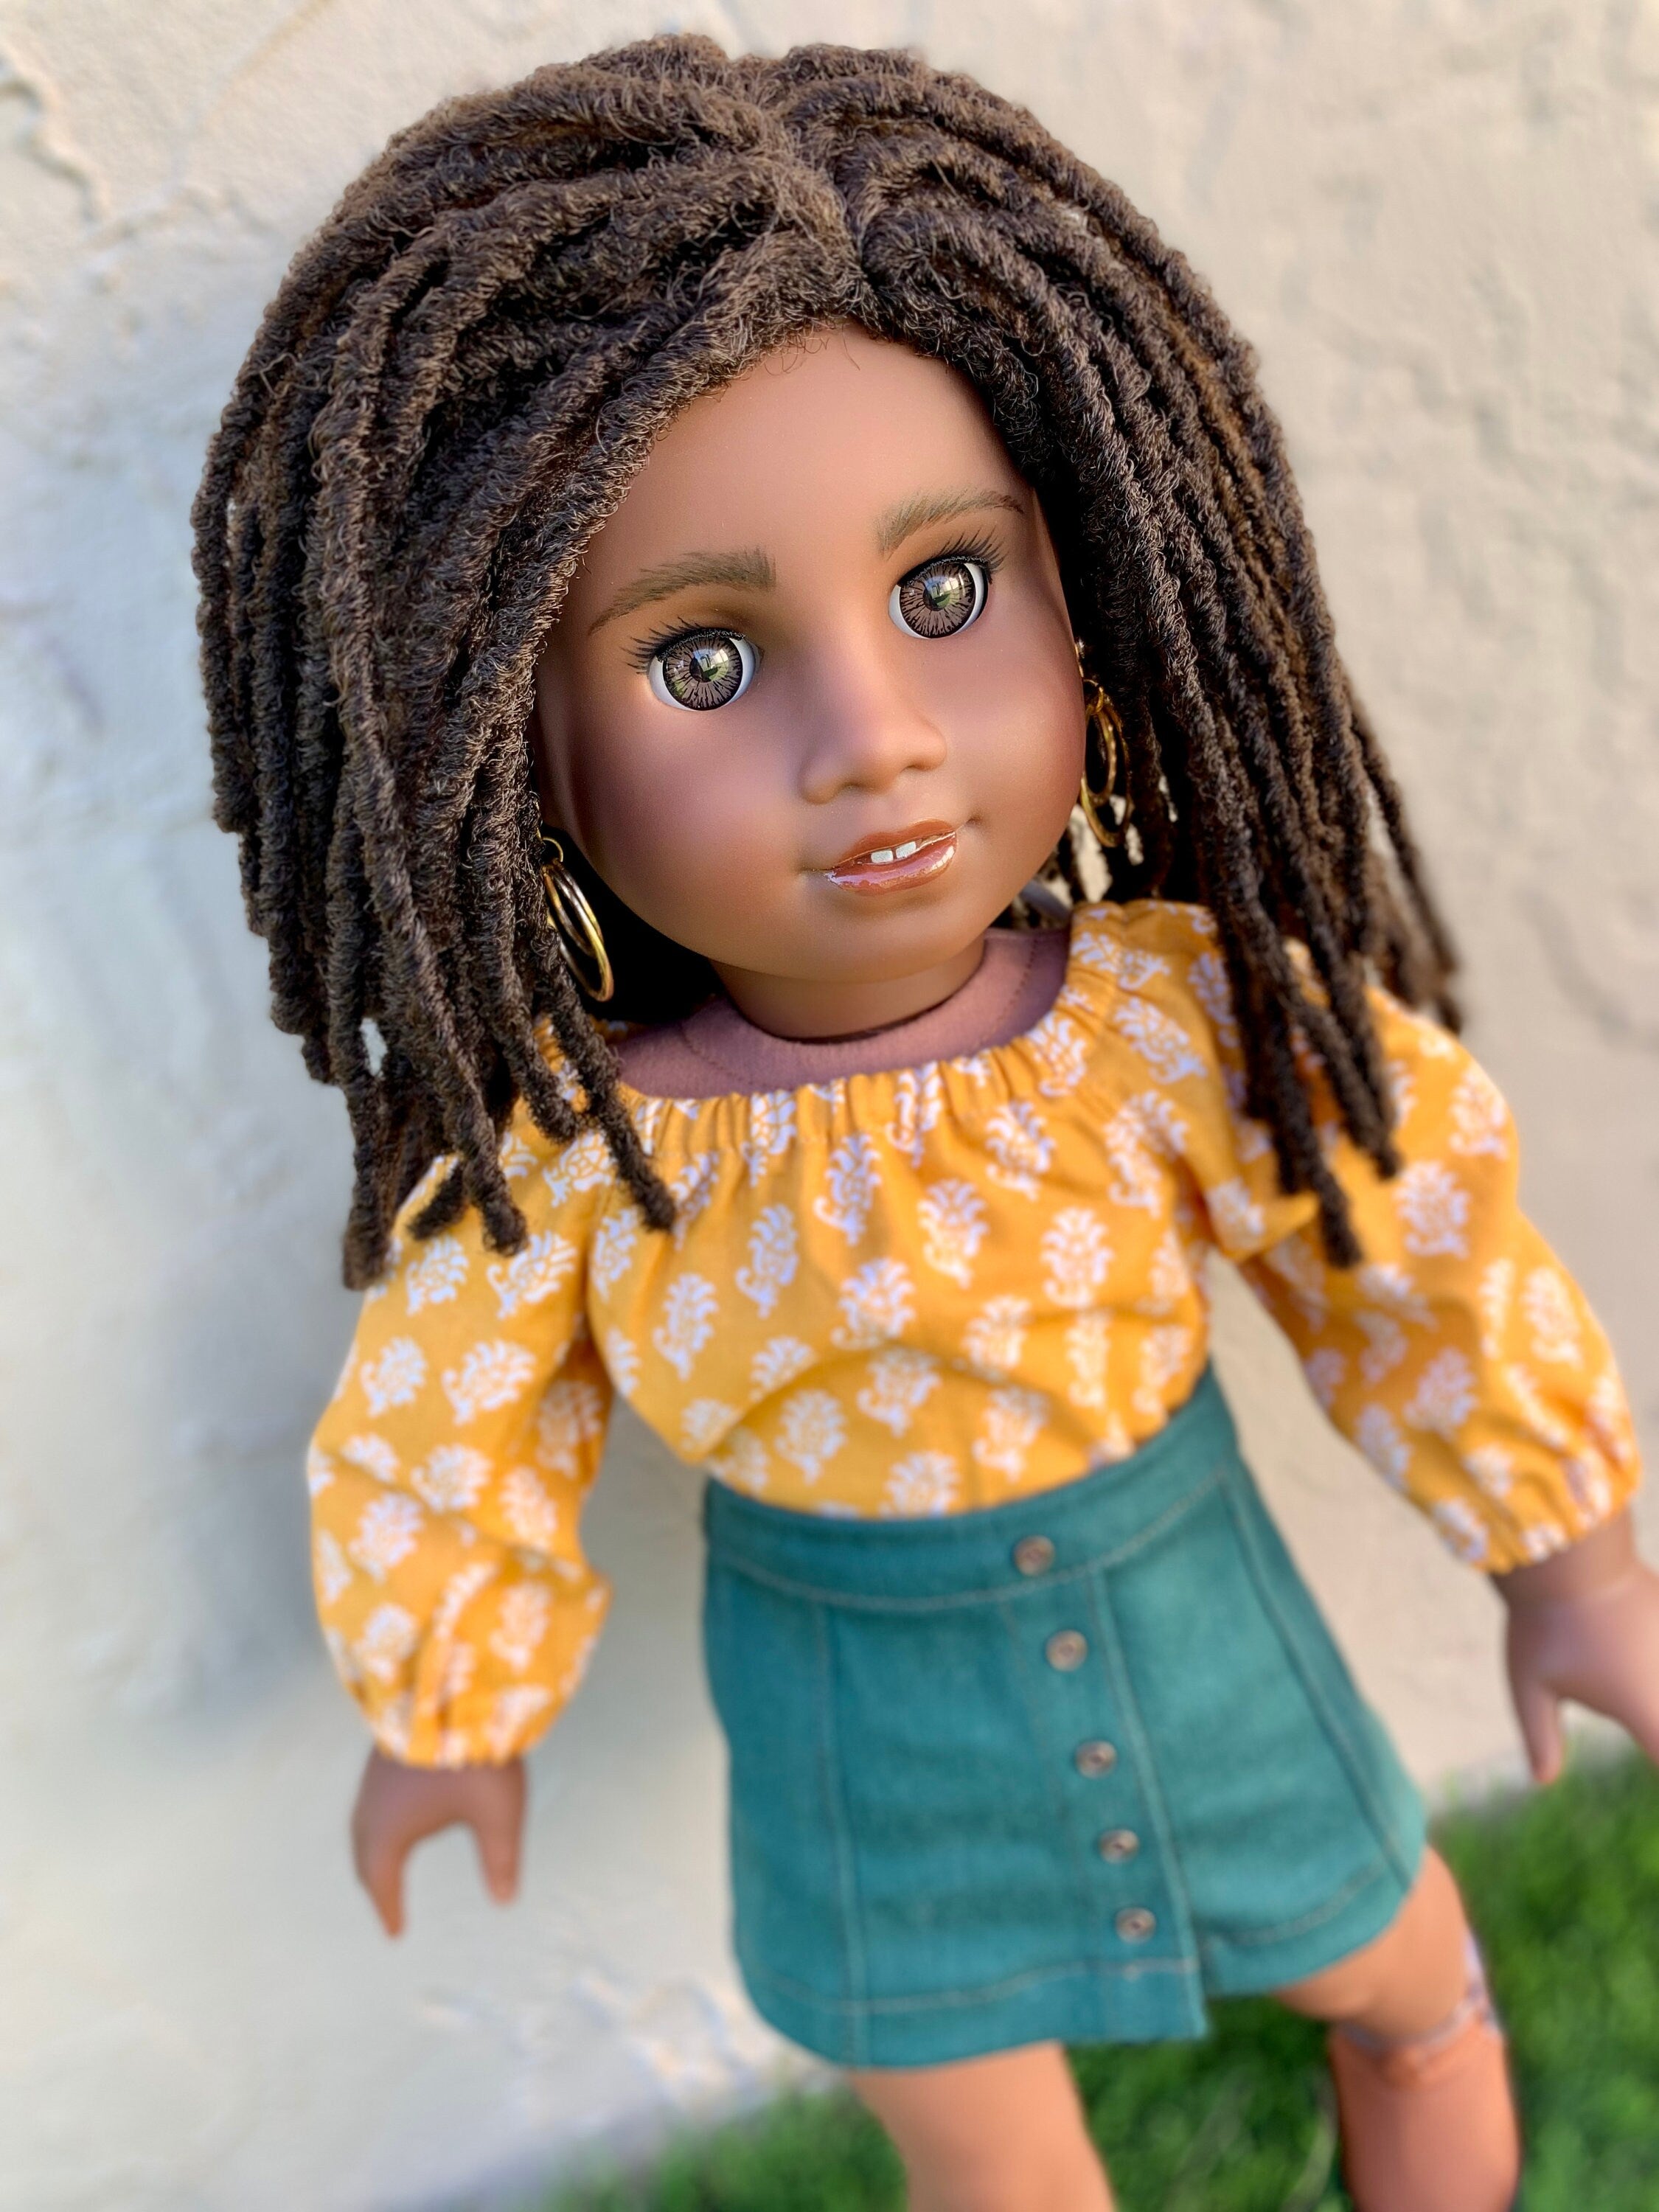 Custom doll wig for 18" American Girl Dolls-Heat Safe-Tangle Resistant-fits 10-11" head of 18" dolls  Journey AA brown Marley locs